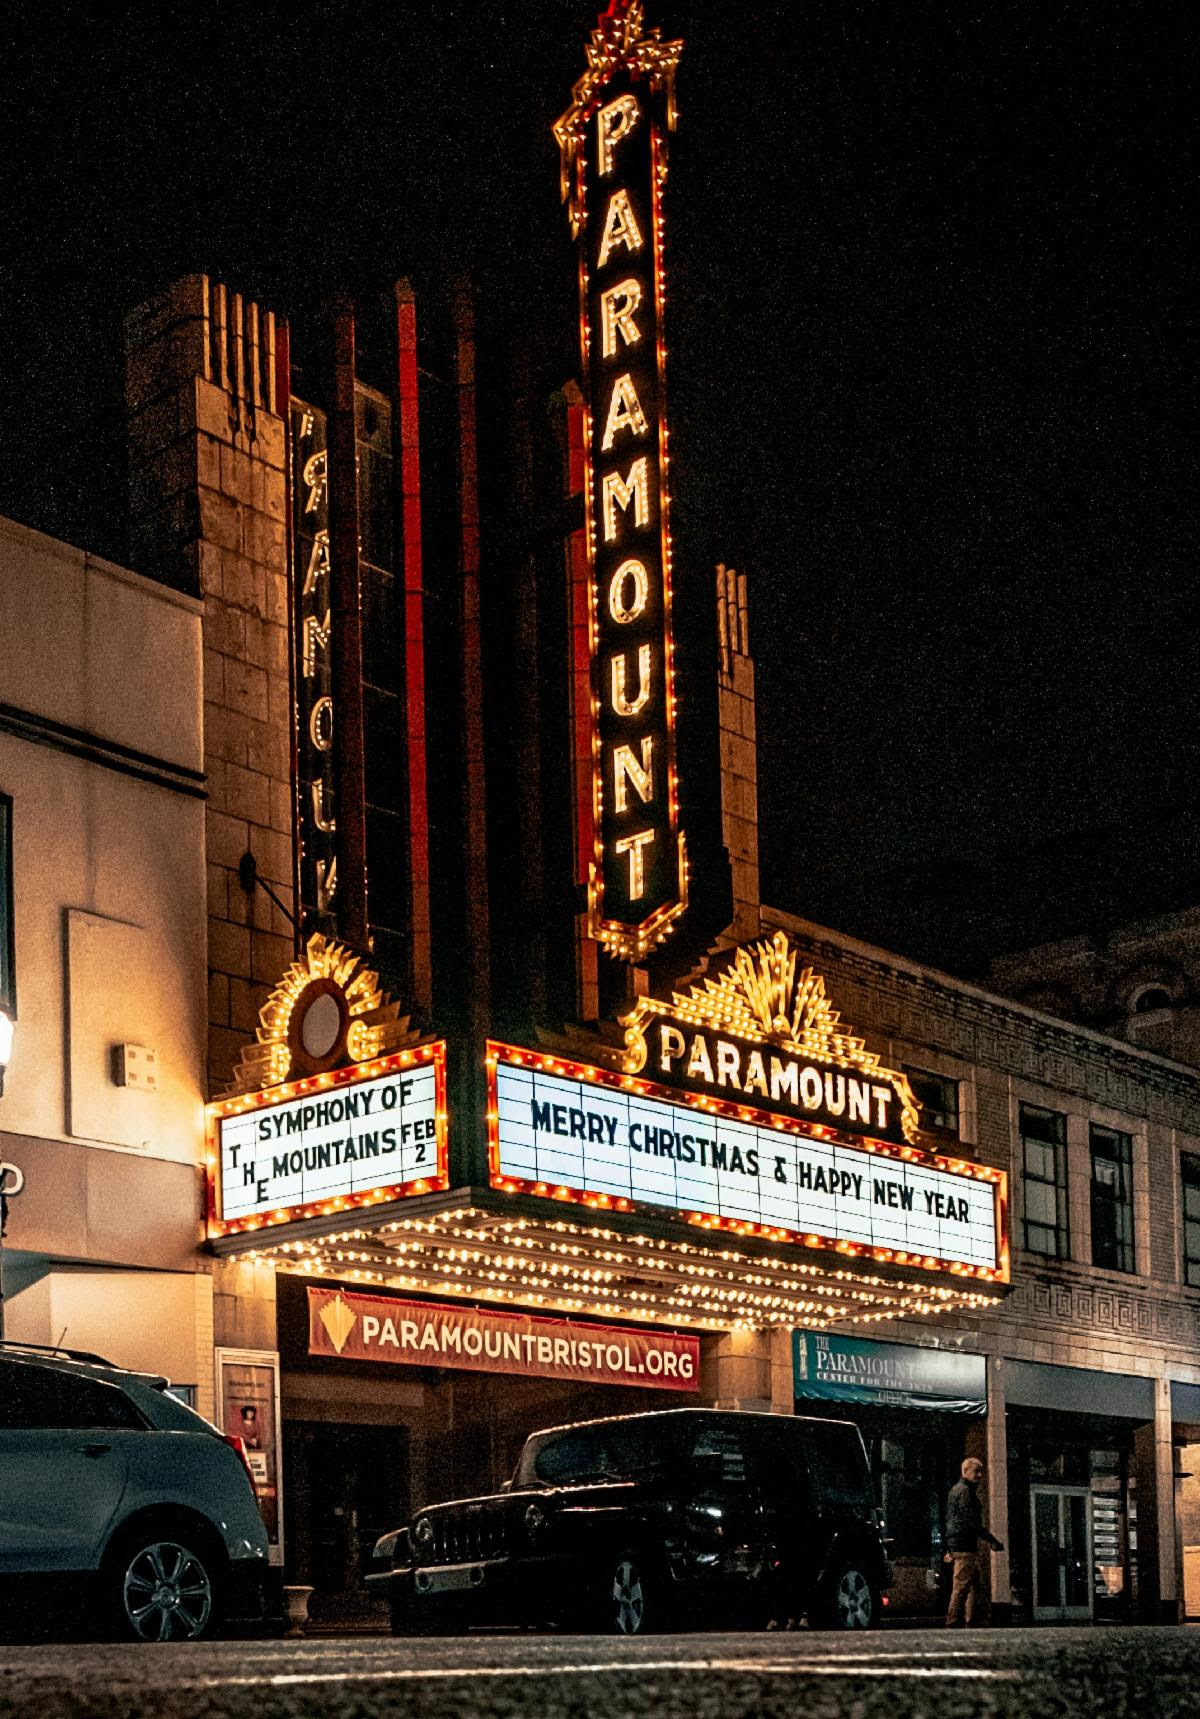 Paramount Theater photo by Justin Campbell on Unsplash